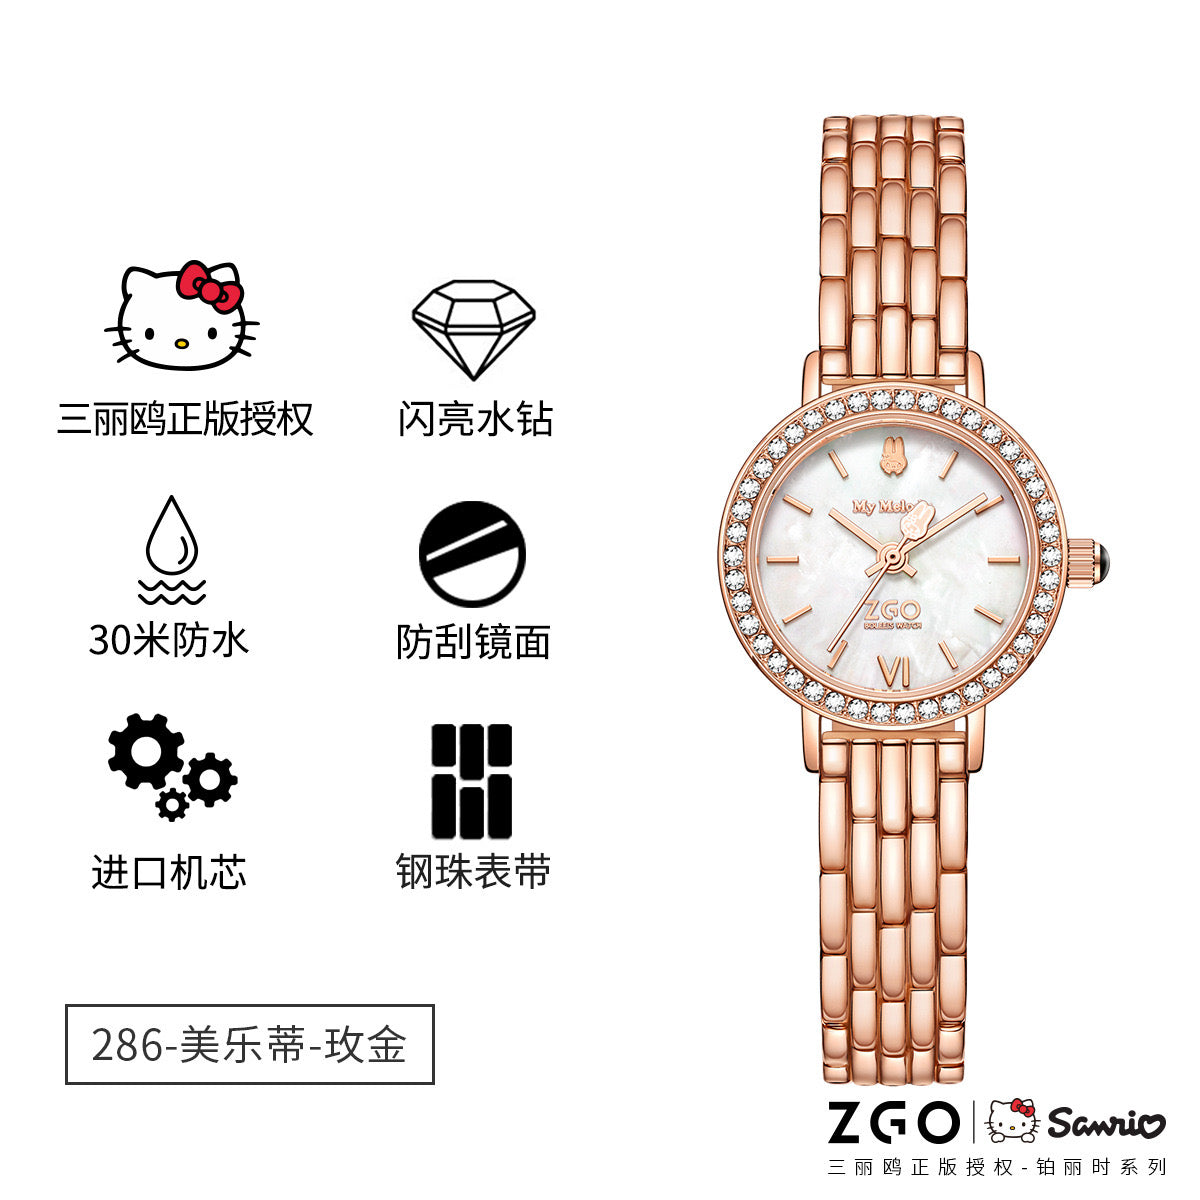 Sanrio Clastyle Elegant Watch for Women Rhinestone Wrist Watch with Bangles Gift for Her (25mm)